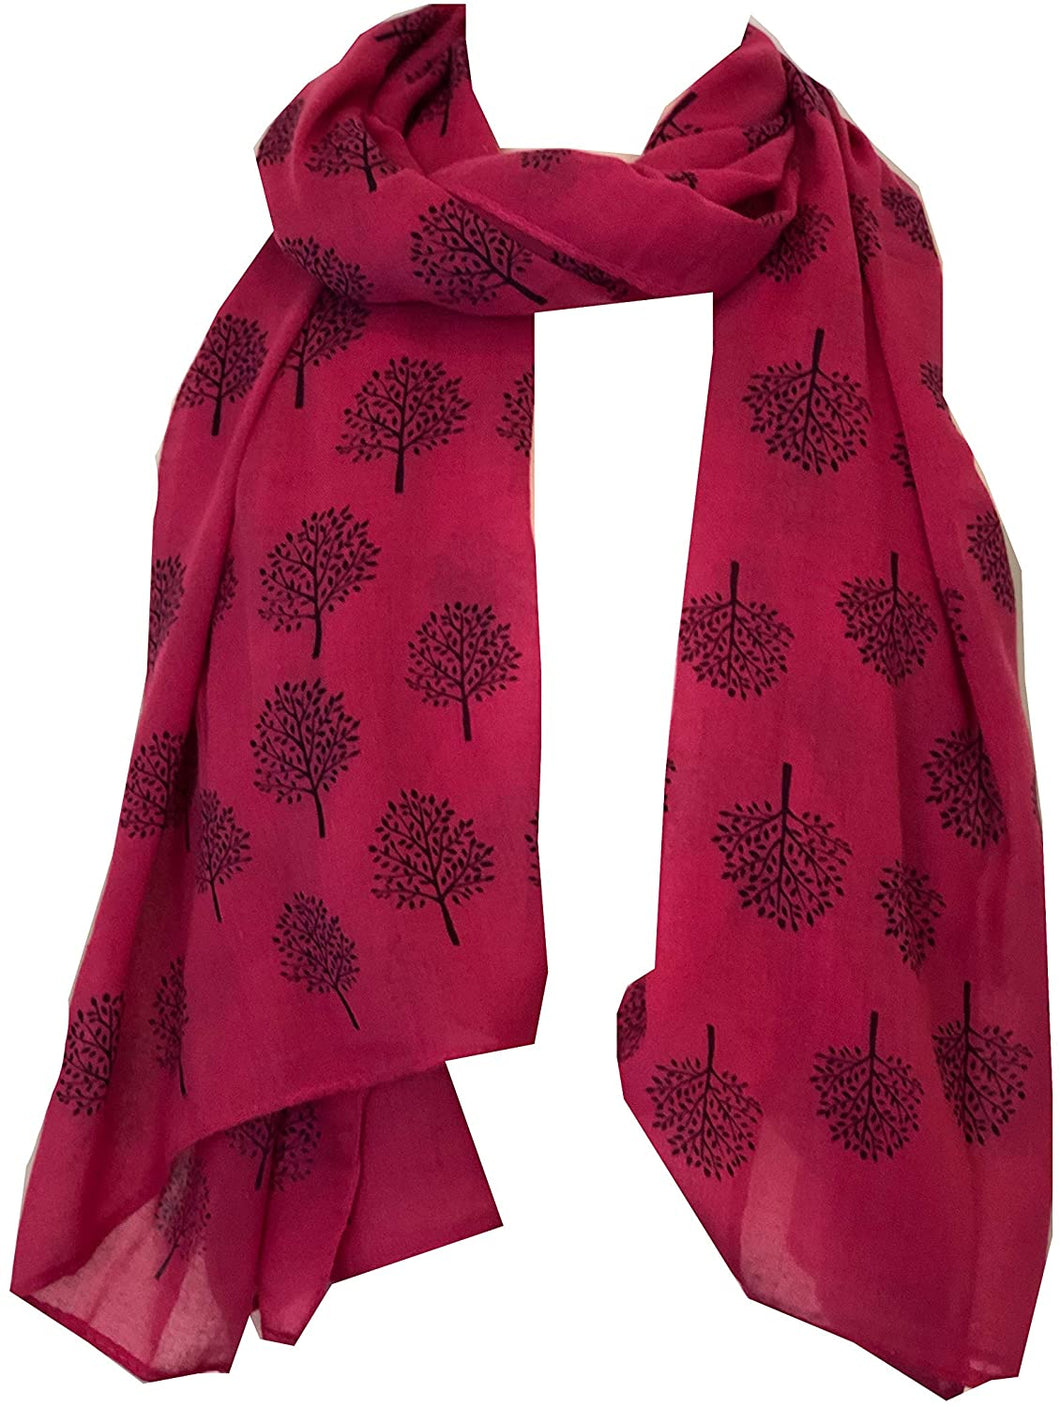 Pamper Yourself Now Fuchsia Pink with Blue Mulberry Tree Design Ladies Fashion Scarves